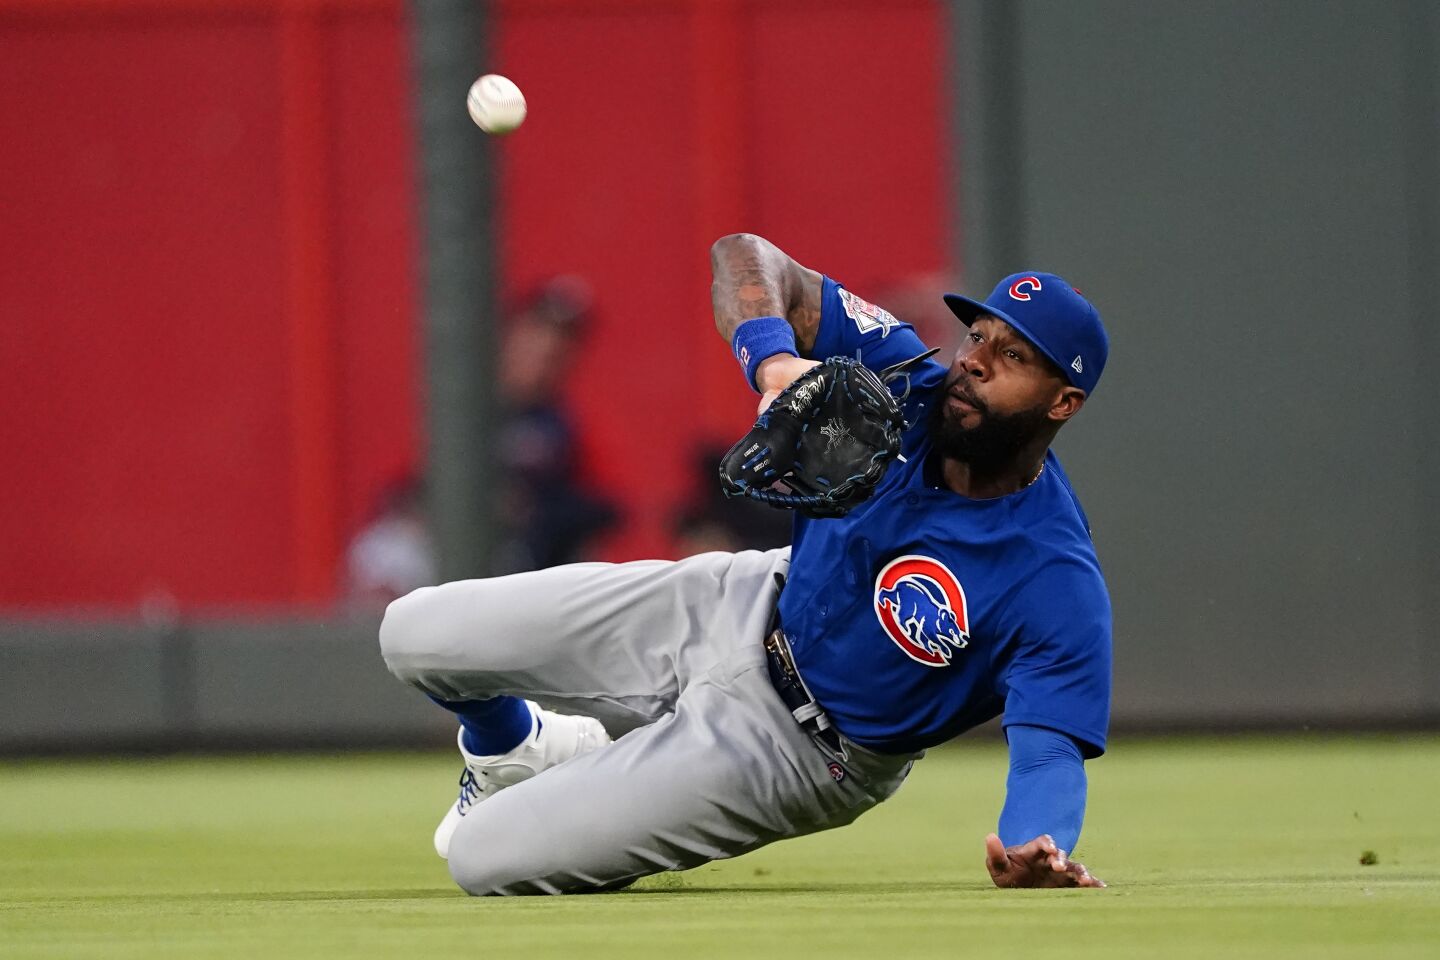 24 | Chicago Cubs (47-66; LW: 27)Jason Heyward, one of the last pieces of the 2016 World Series winner, will part ways with the Cubs after the season, baseball ops chief Jed Hoyer said last week.